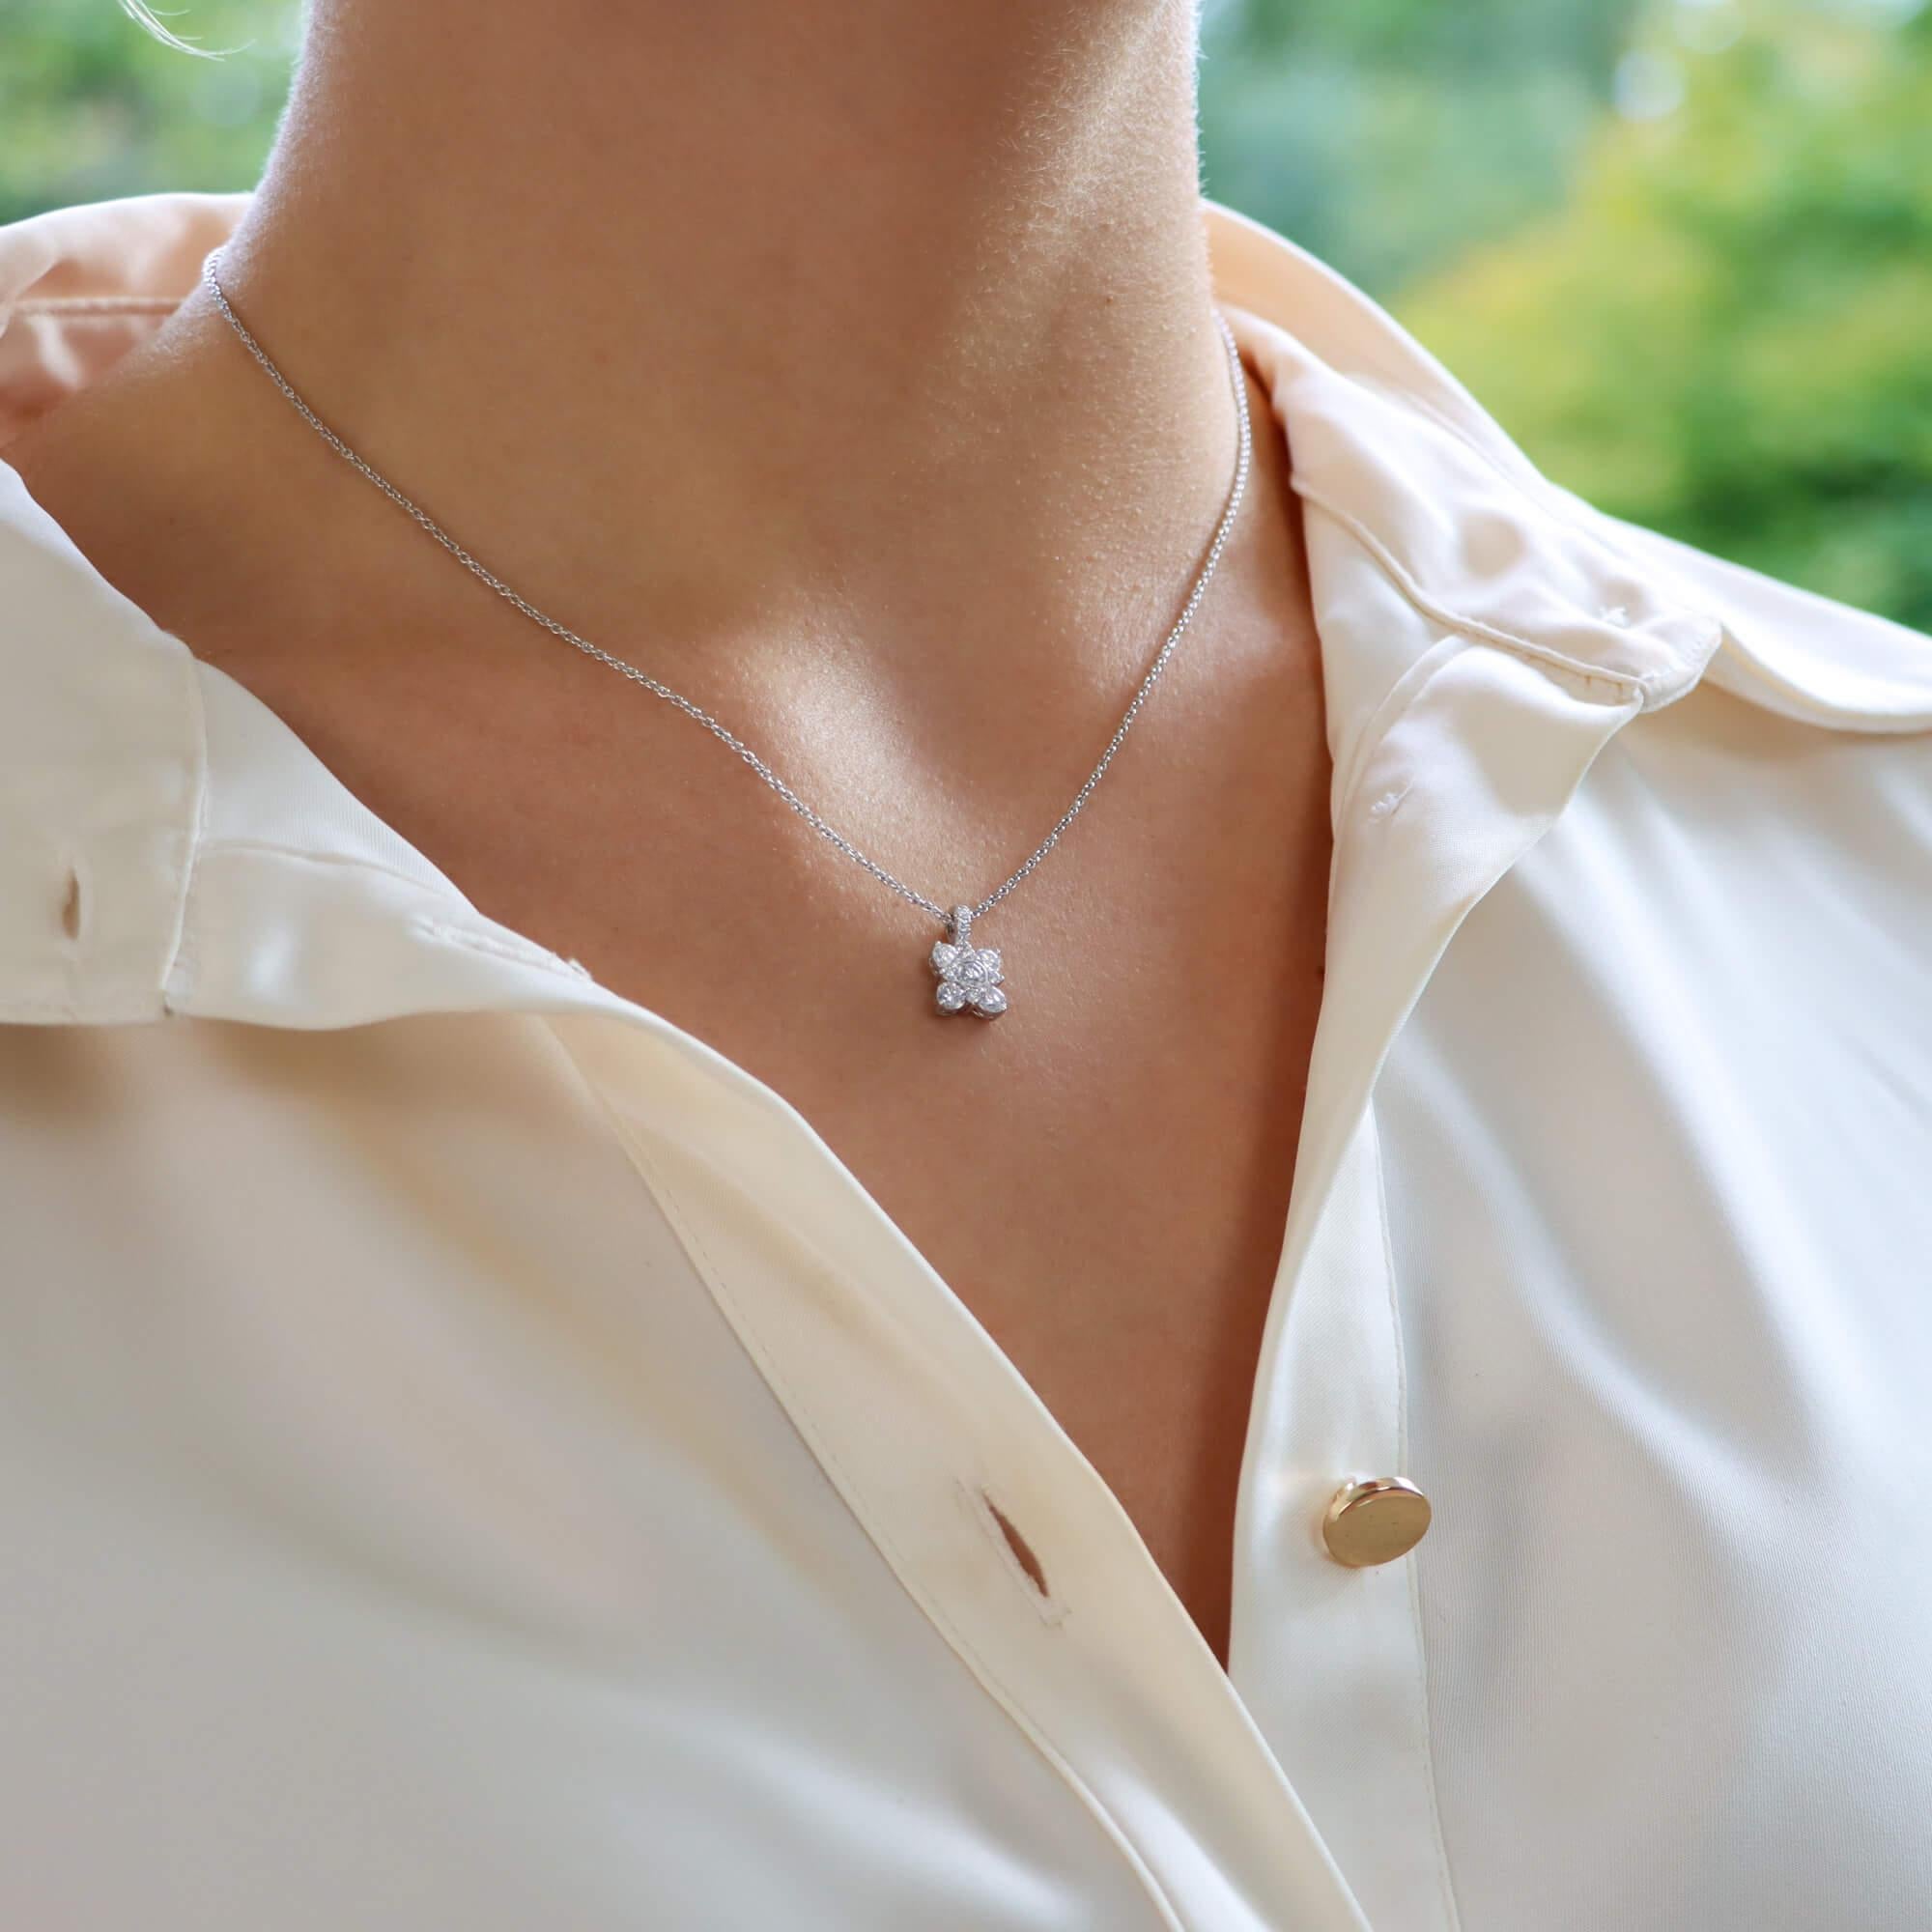 This rather stunning pendant contains nine round brilliant-cut diamonds that create the wonderful floral star motif with a diamond set bale to further accentuate the design. 
The central diamond is bezel set with mille grain detailing, four further